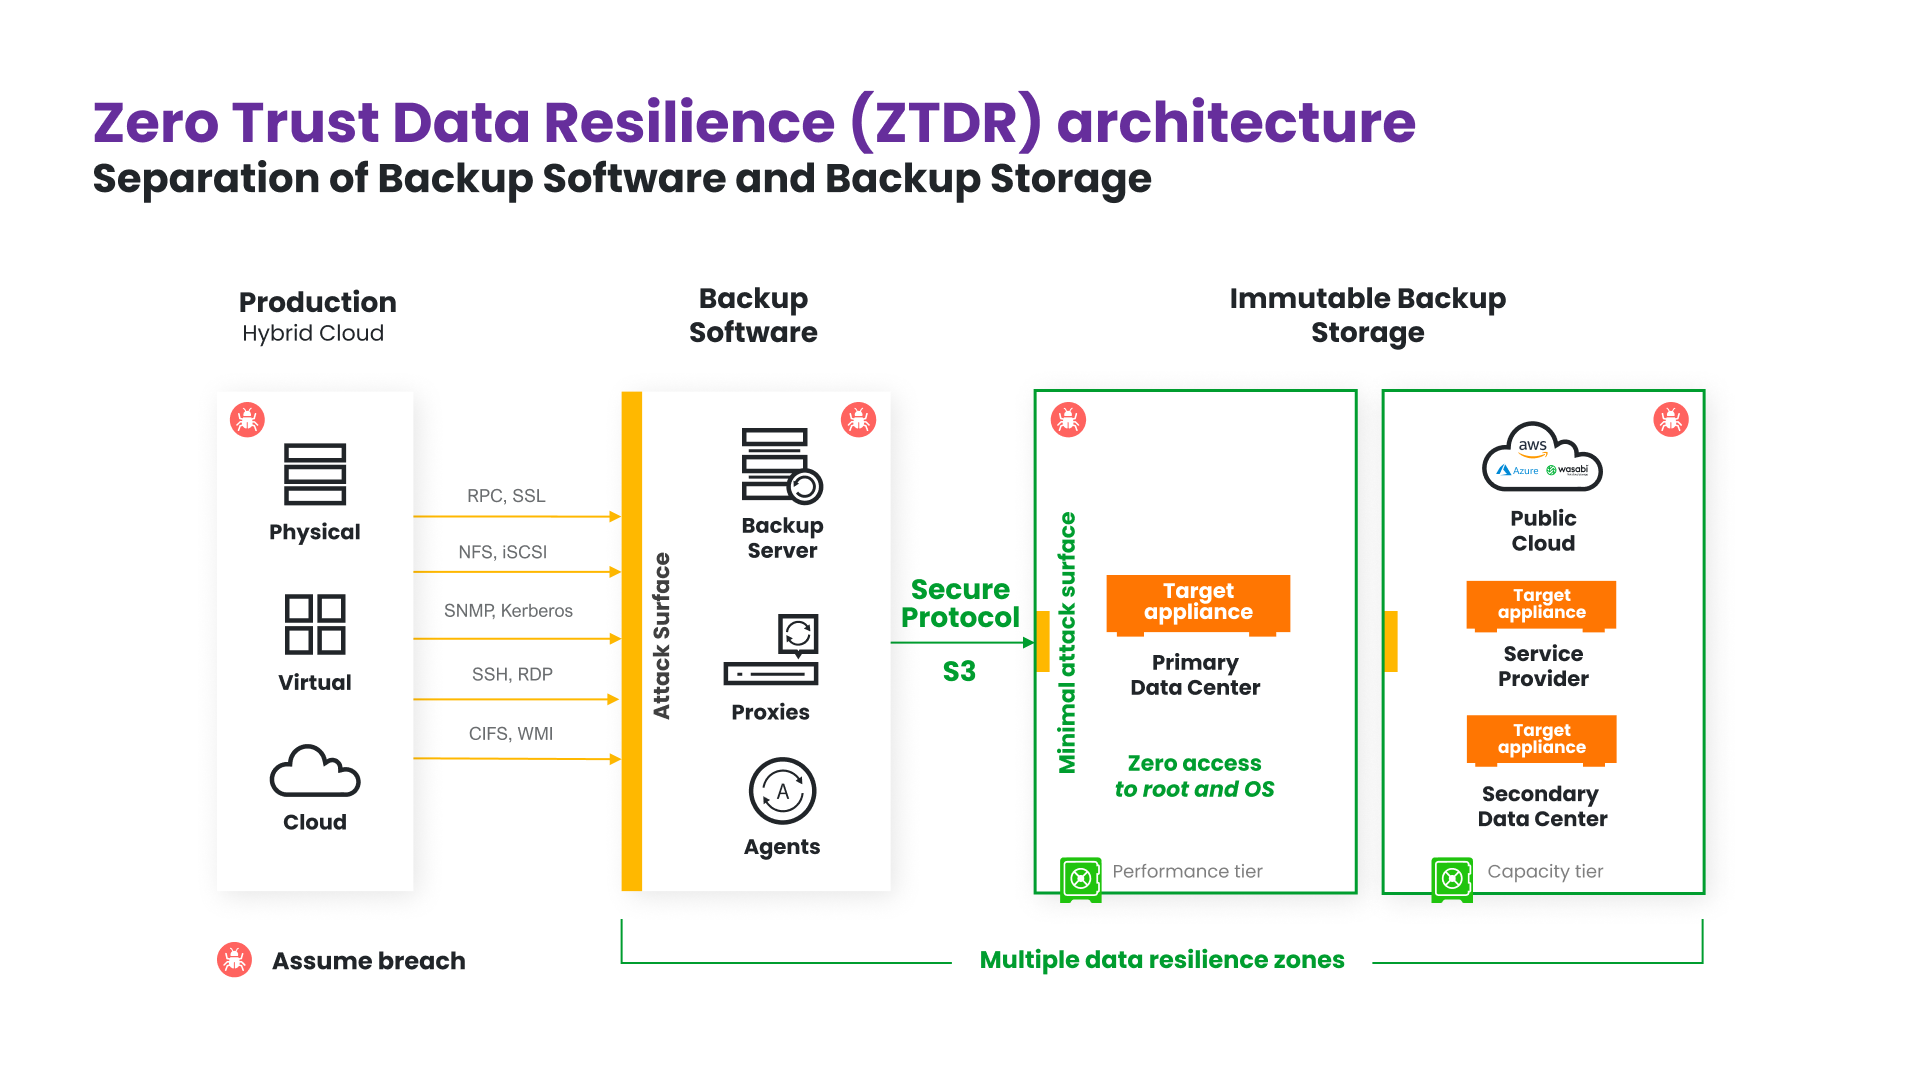 Illustrative chart of Zero Trust Data Resilience (ZTDR) architecture by Object First, depicting the separation of Backup Software and Backup Storage, with a detailed layout showing Production in a hybrid cloud environment, Backup Software with various protocols, and Immutable Backup Storage across multiple data resilience zones including public cloud, primary data center, and service providers 